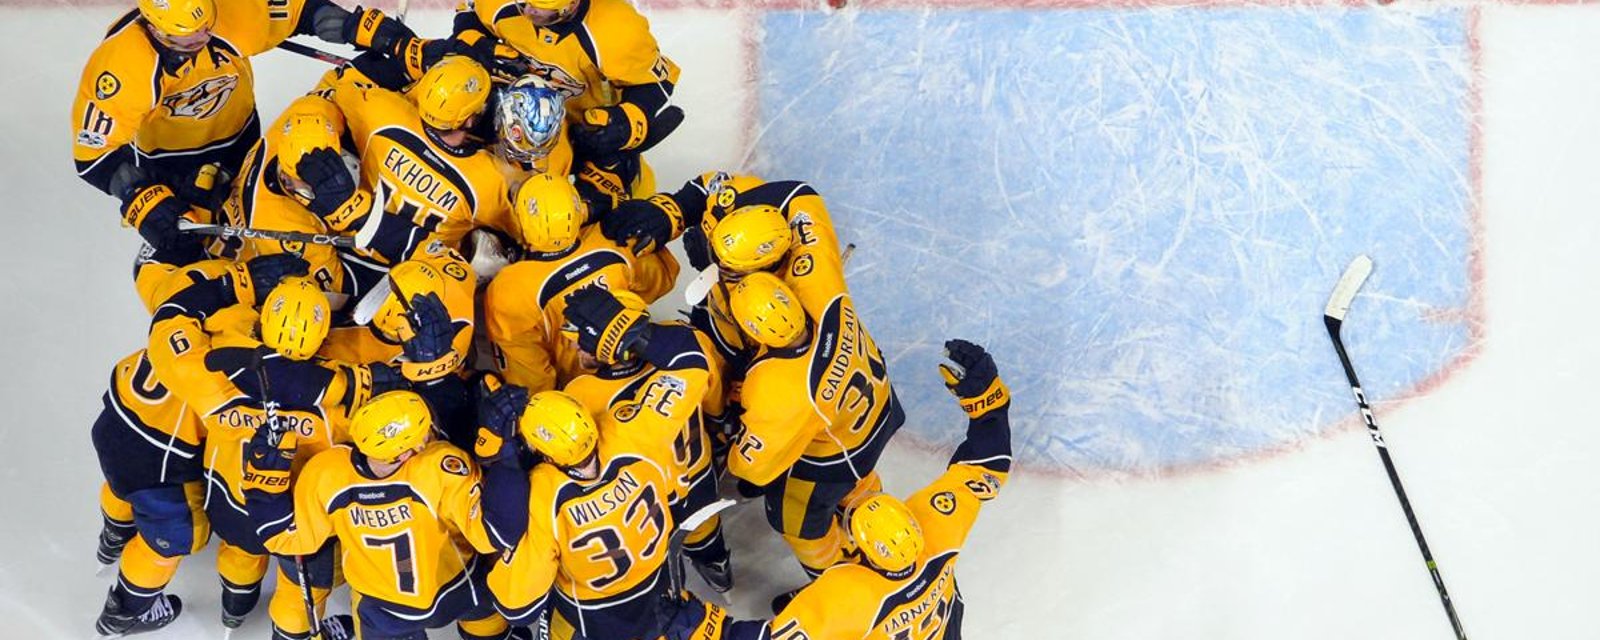 Can the Preds overcome this clear disadvantage? 